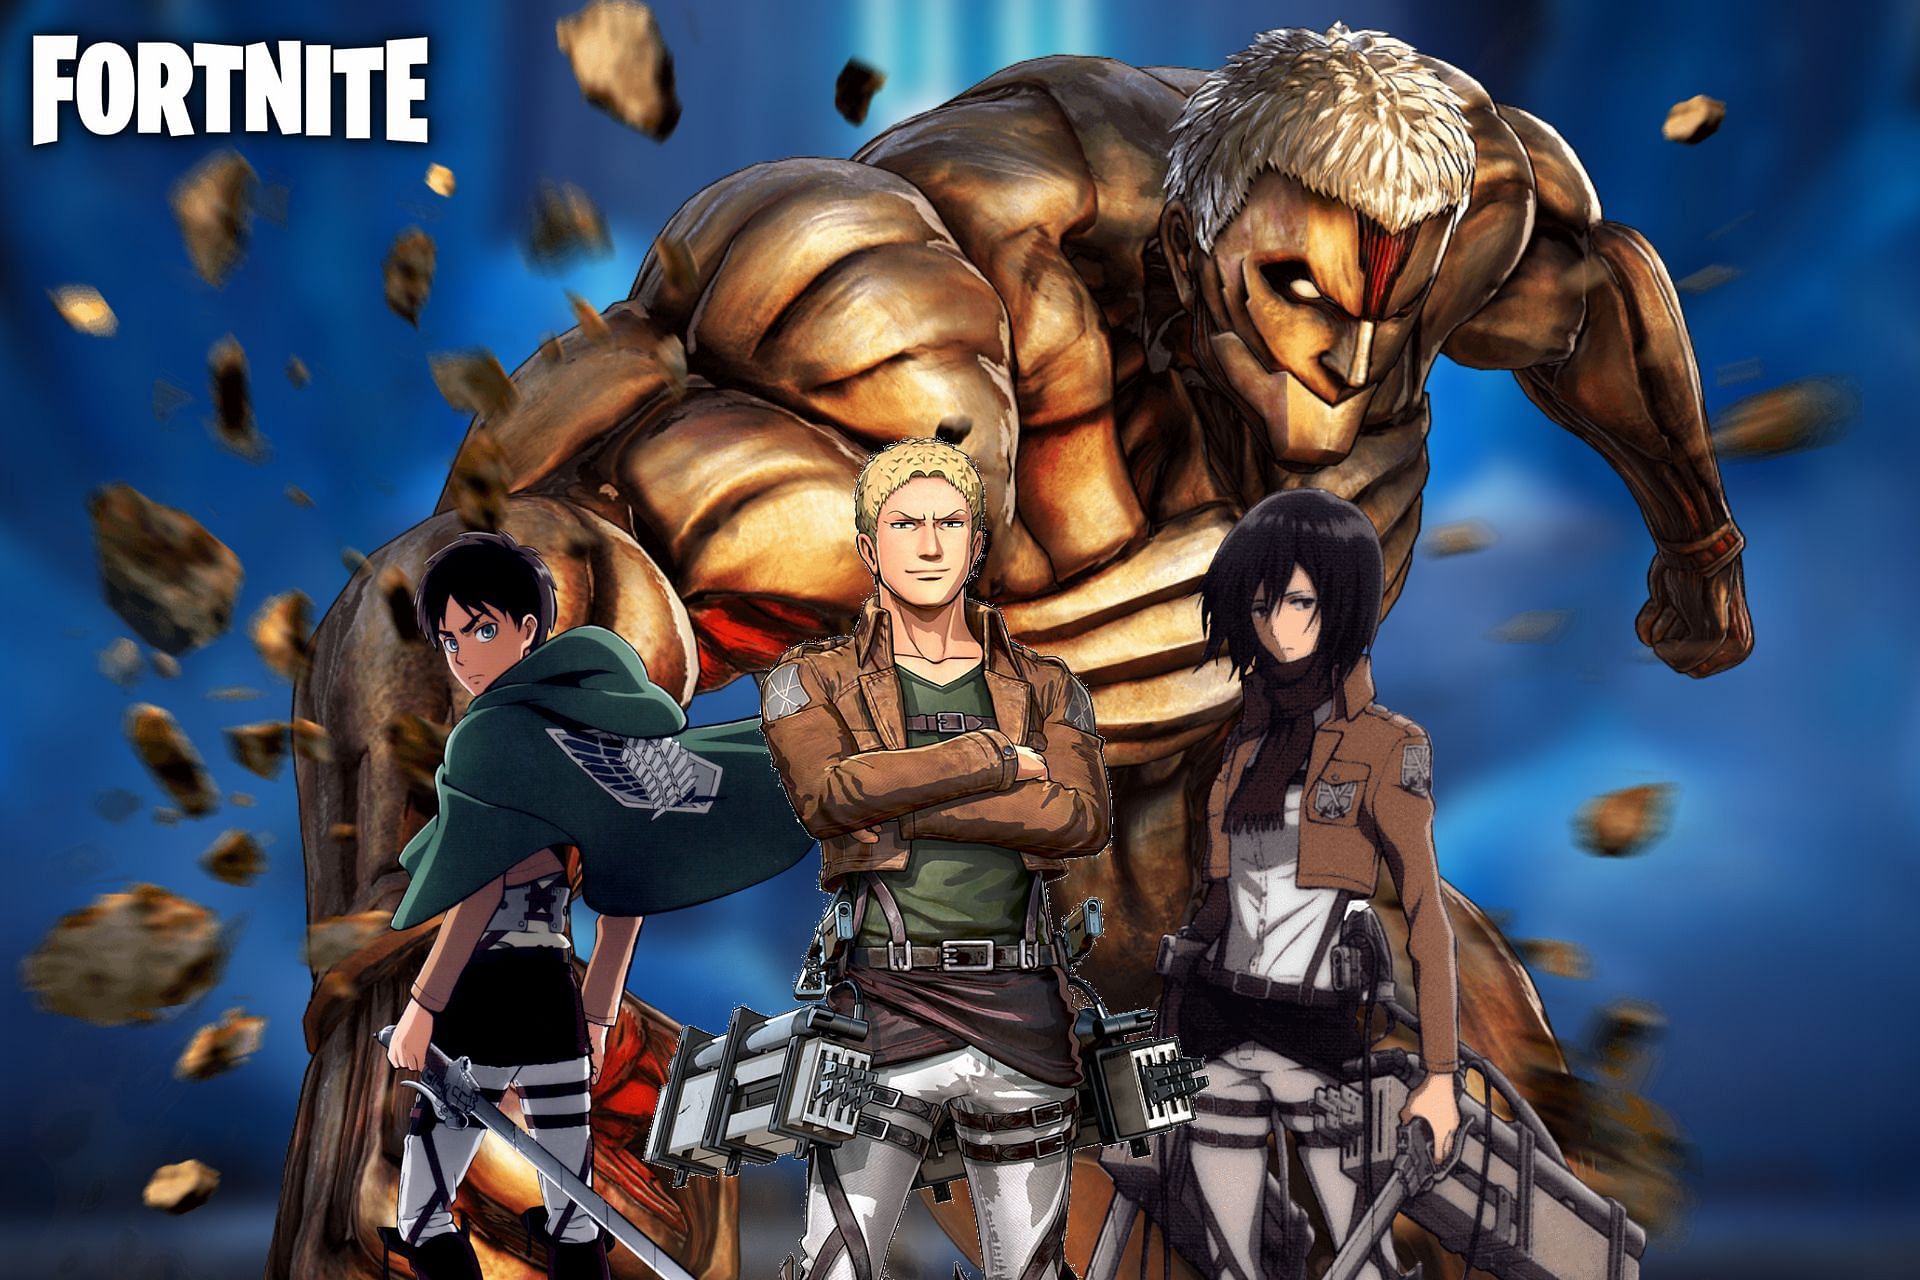 mental Konsekvent I fare 8 skins to expect from the Fortnite x Attack on Titan collaboration